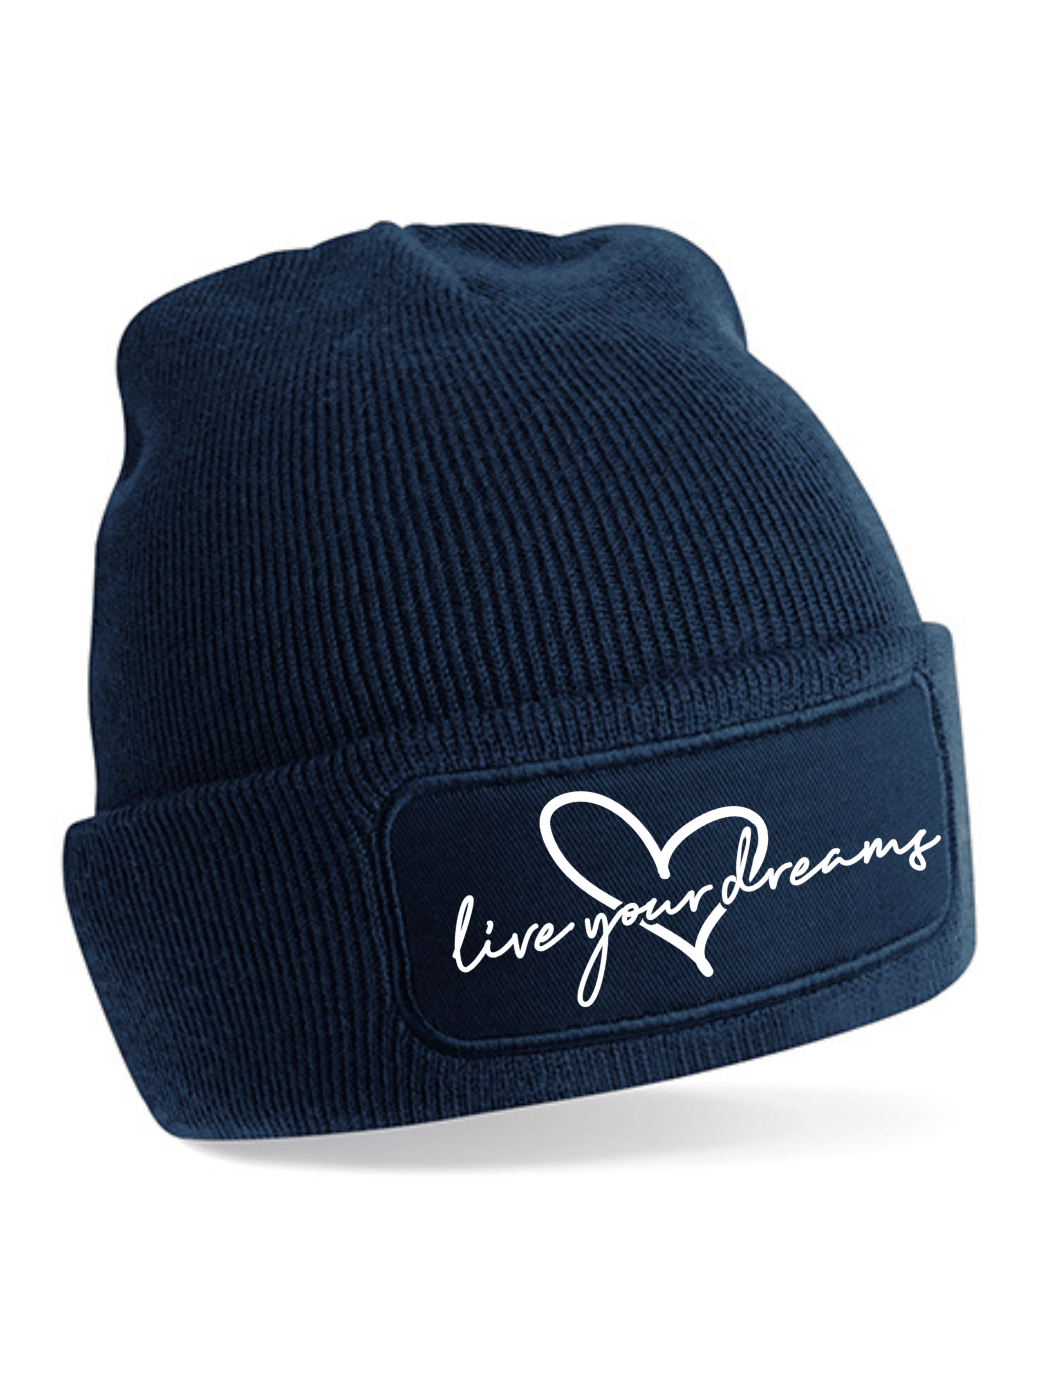 LIVE YOUR DREAMS Patch Beanie navy